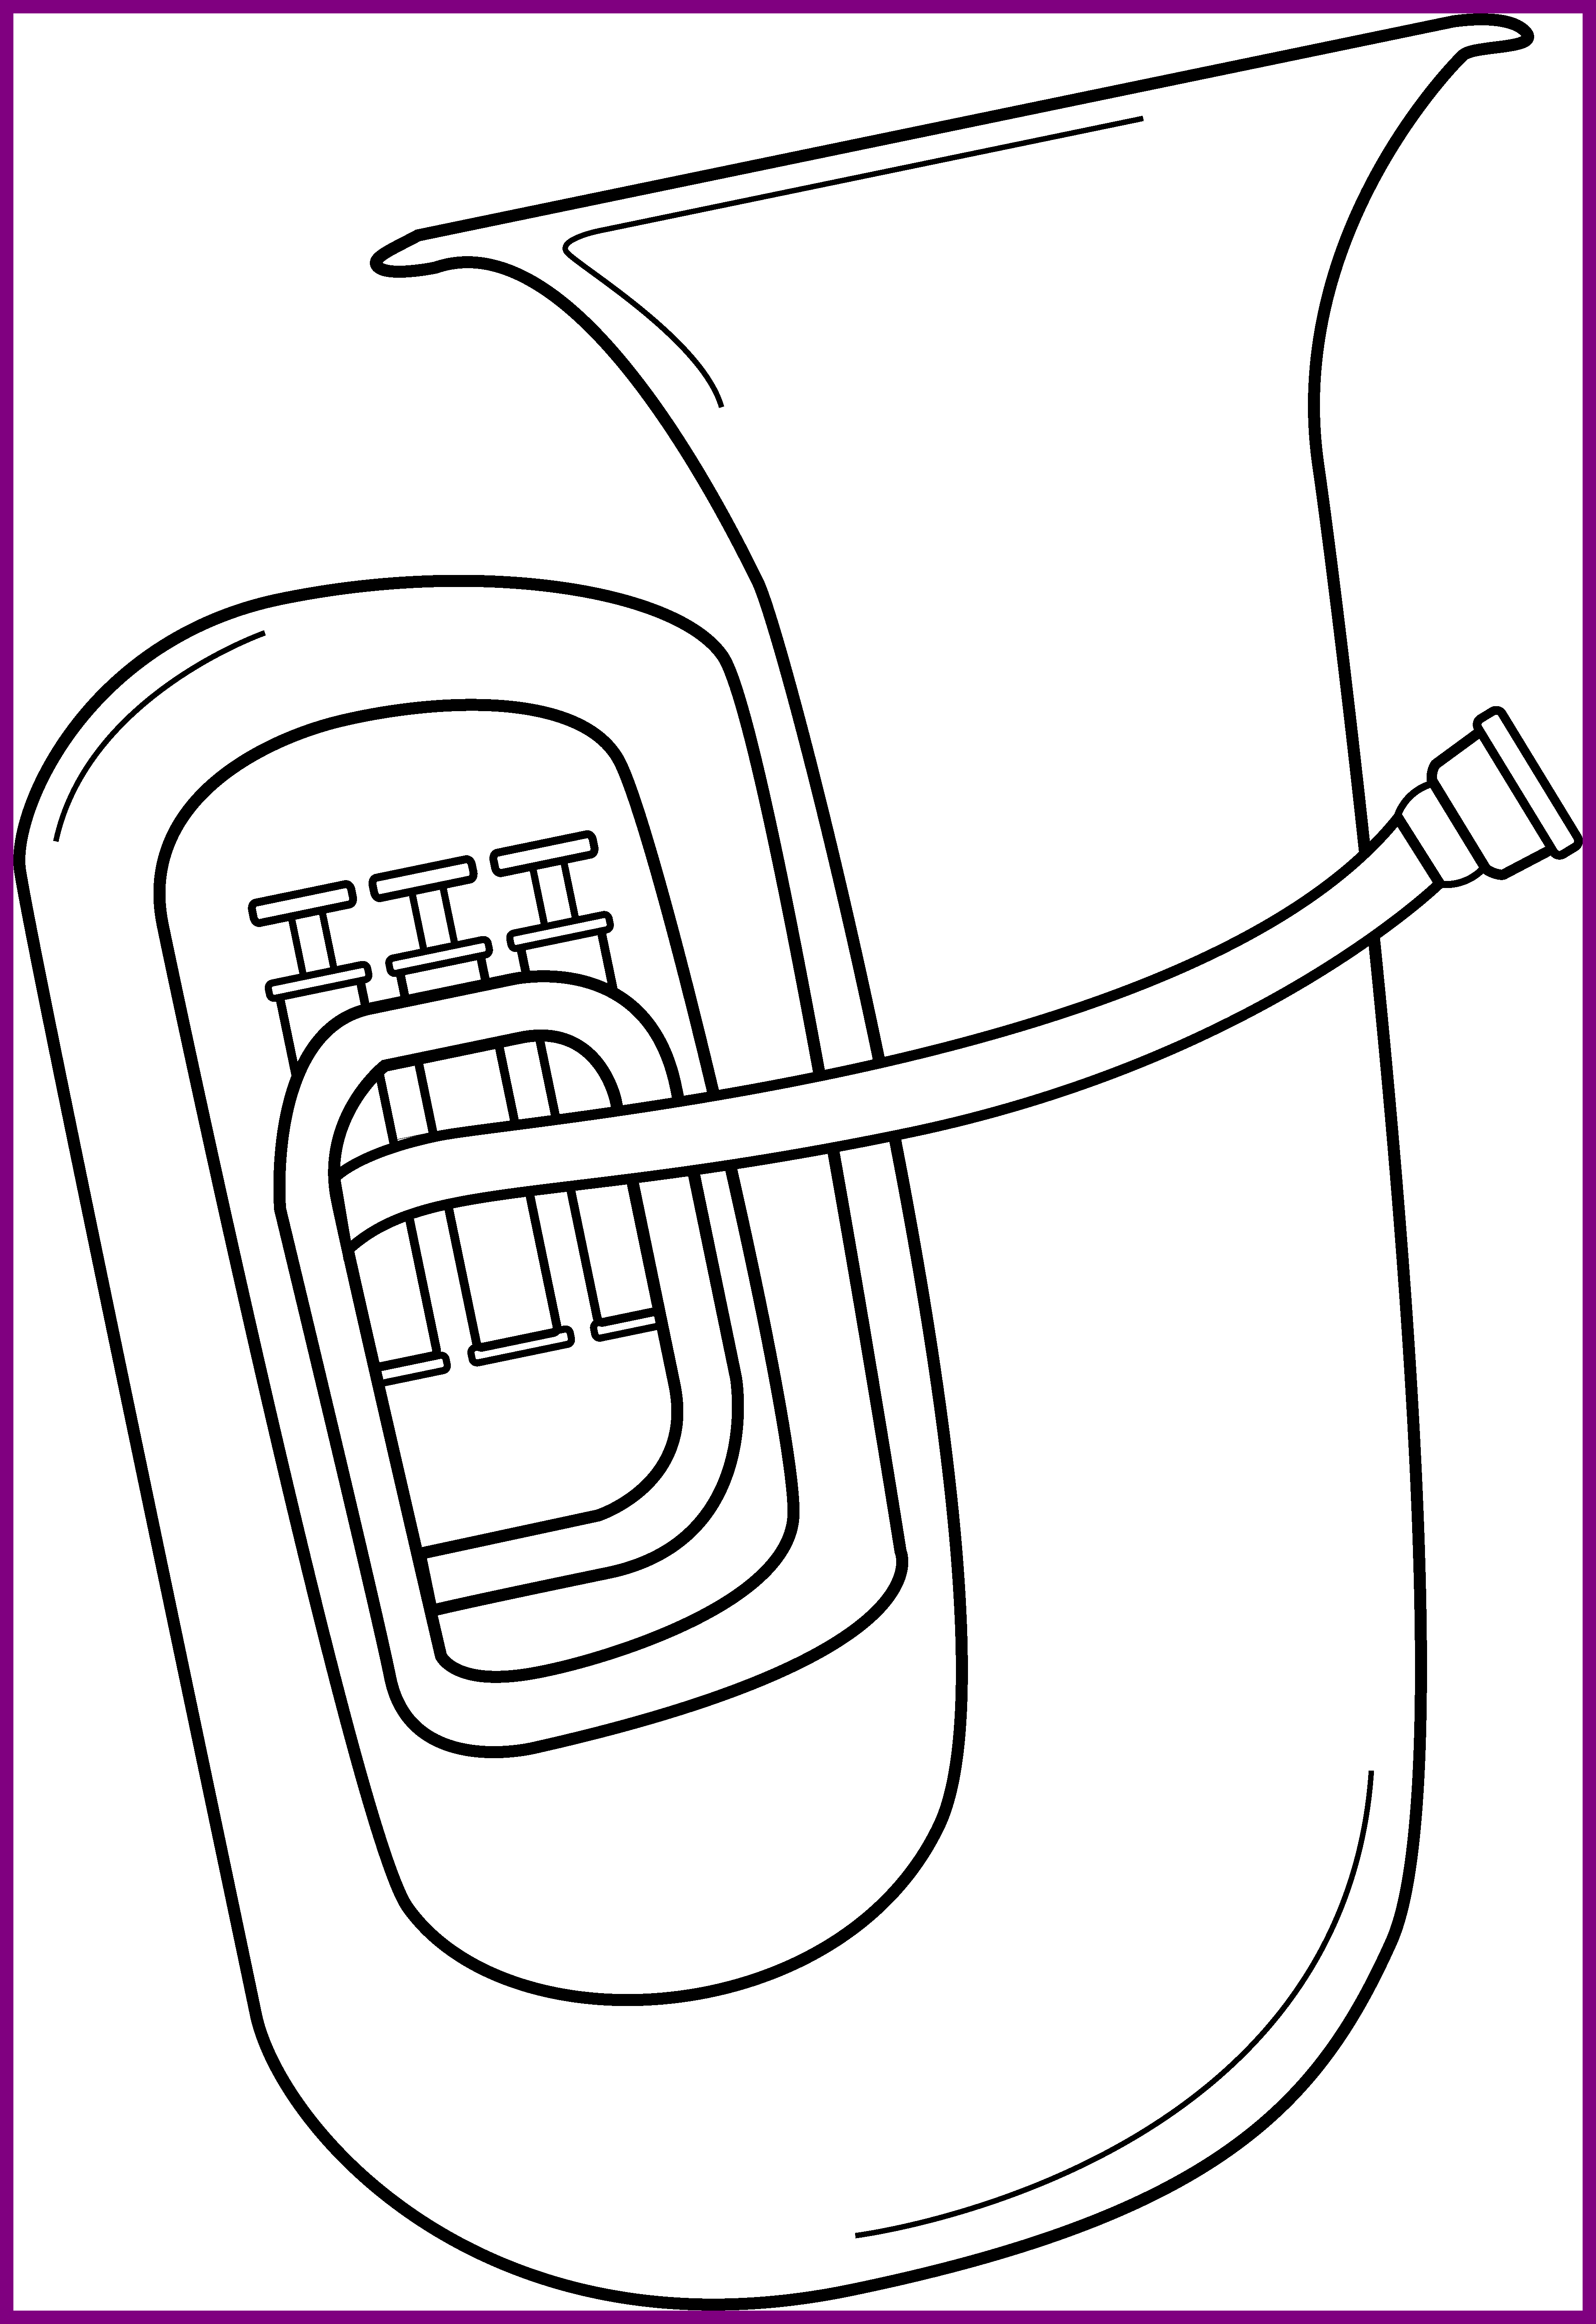 Instruments clipart tuba. Astonishing my coloring page